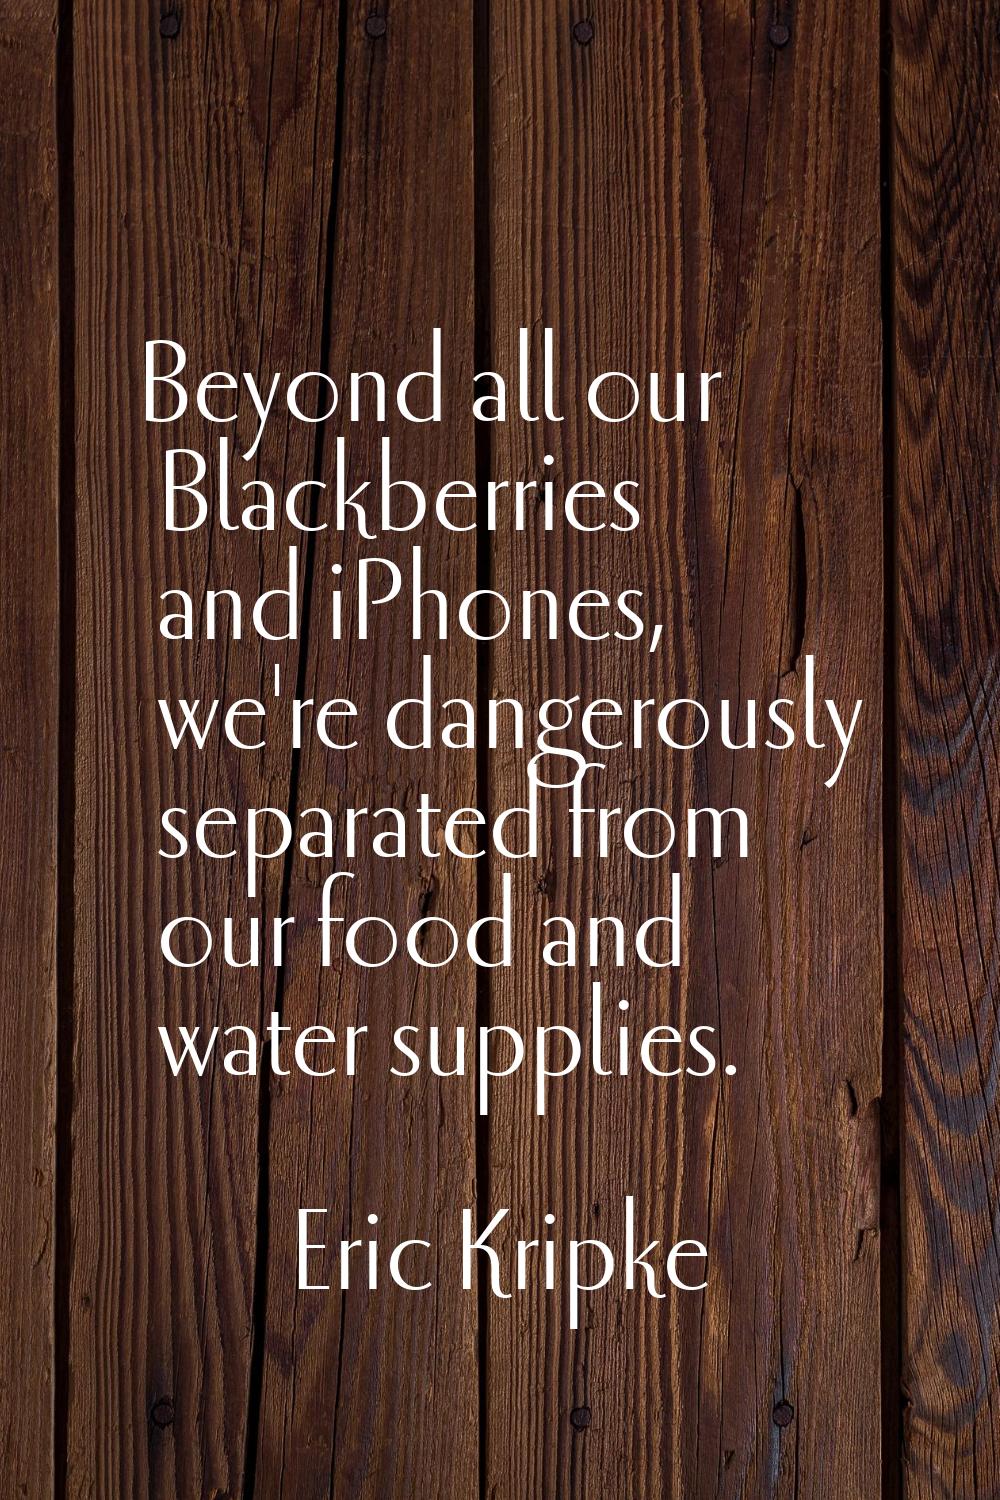 Beyond all our Blackberries and iPhones, we're dangerously separated from our food and water suppli